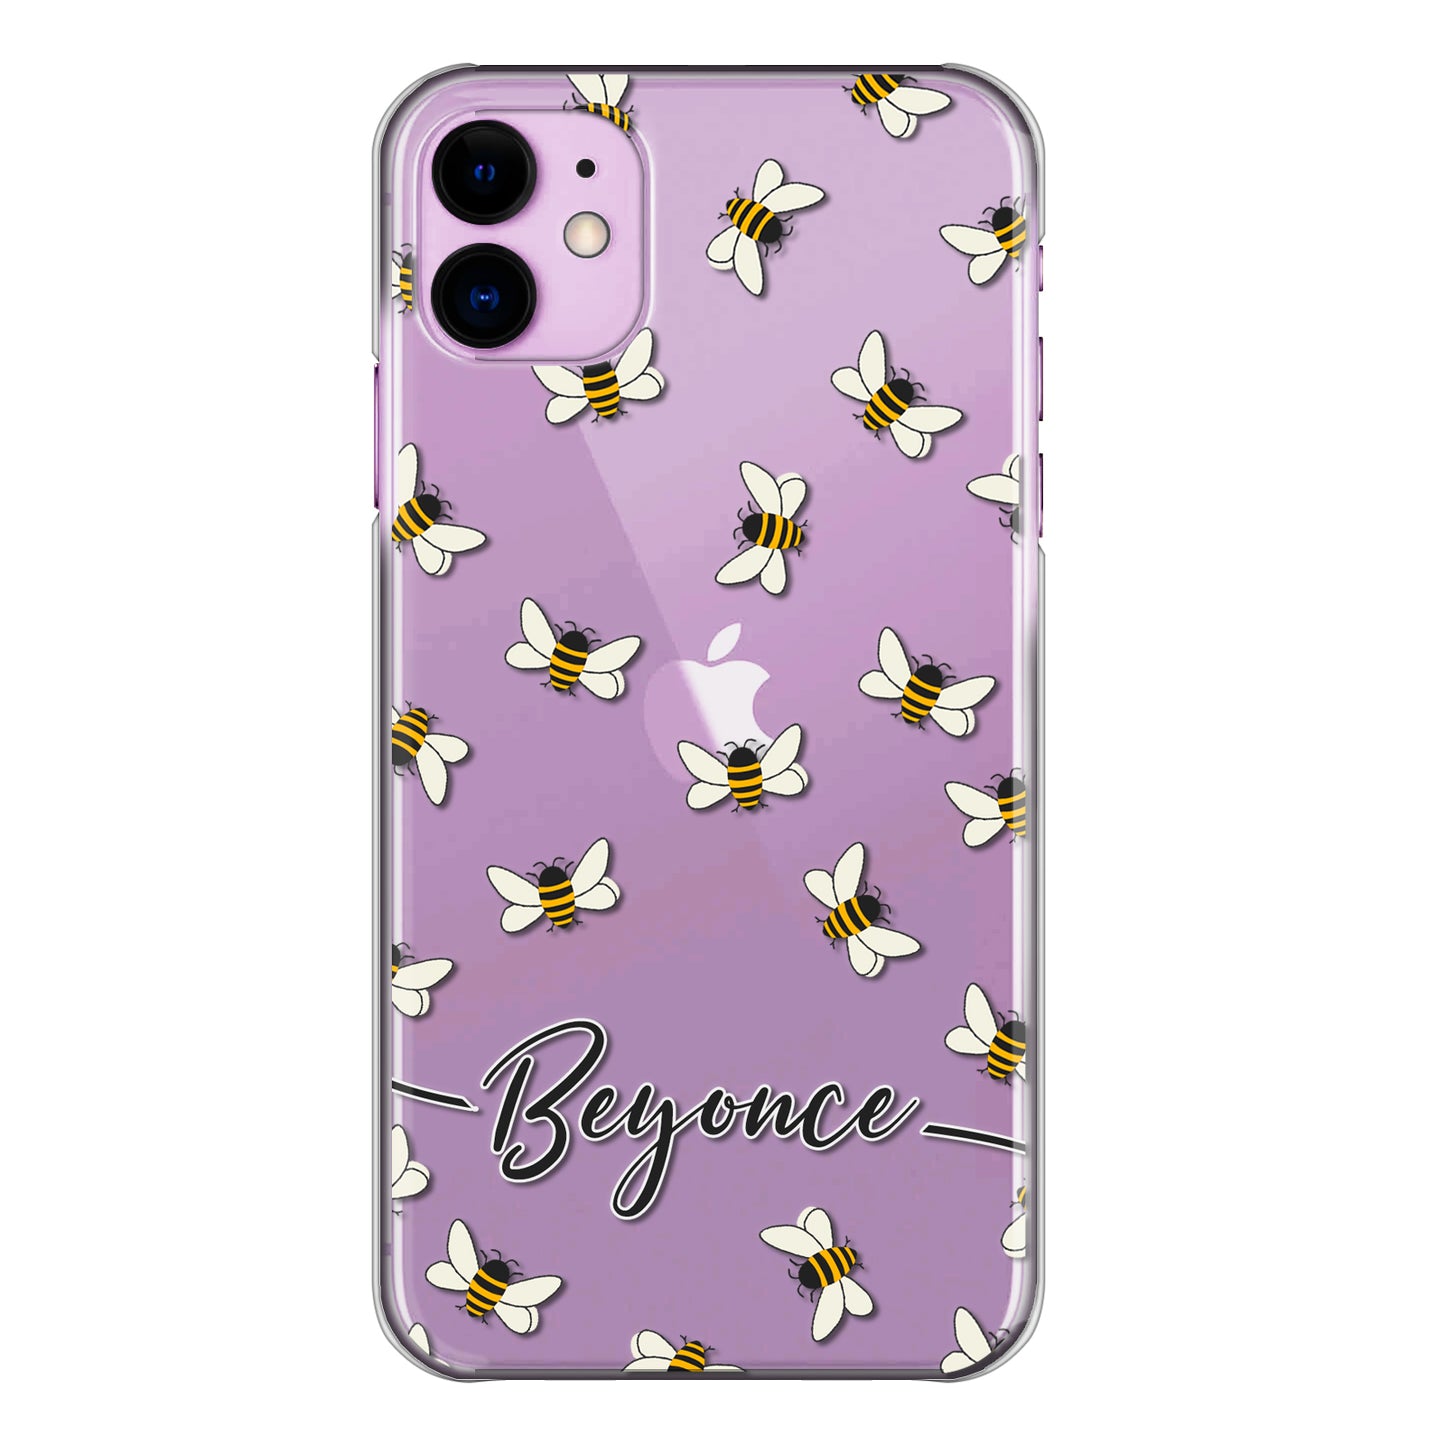 Personalised Samsung Galaxy Phone Hard Case with Honeybees and White Outlined Text